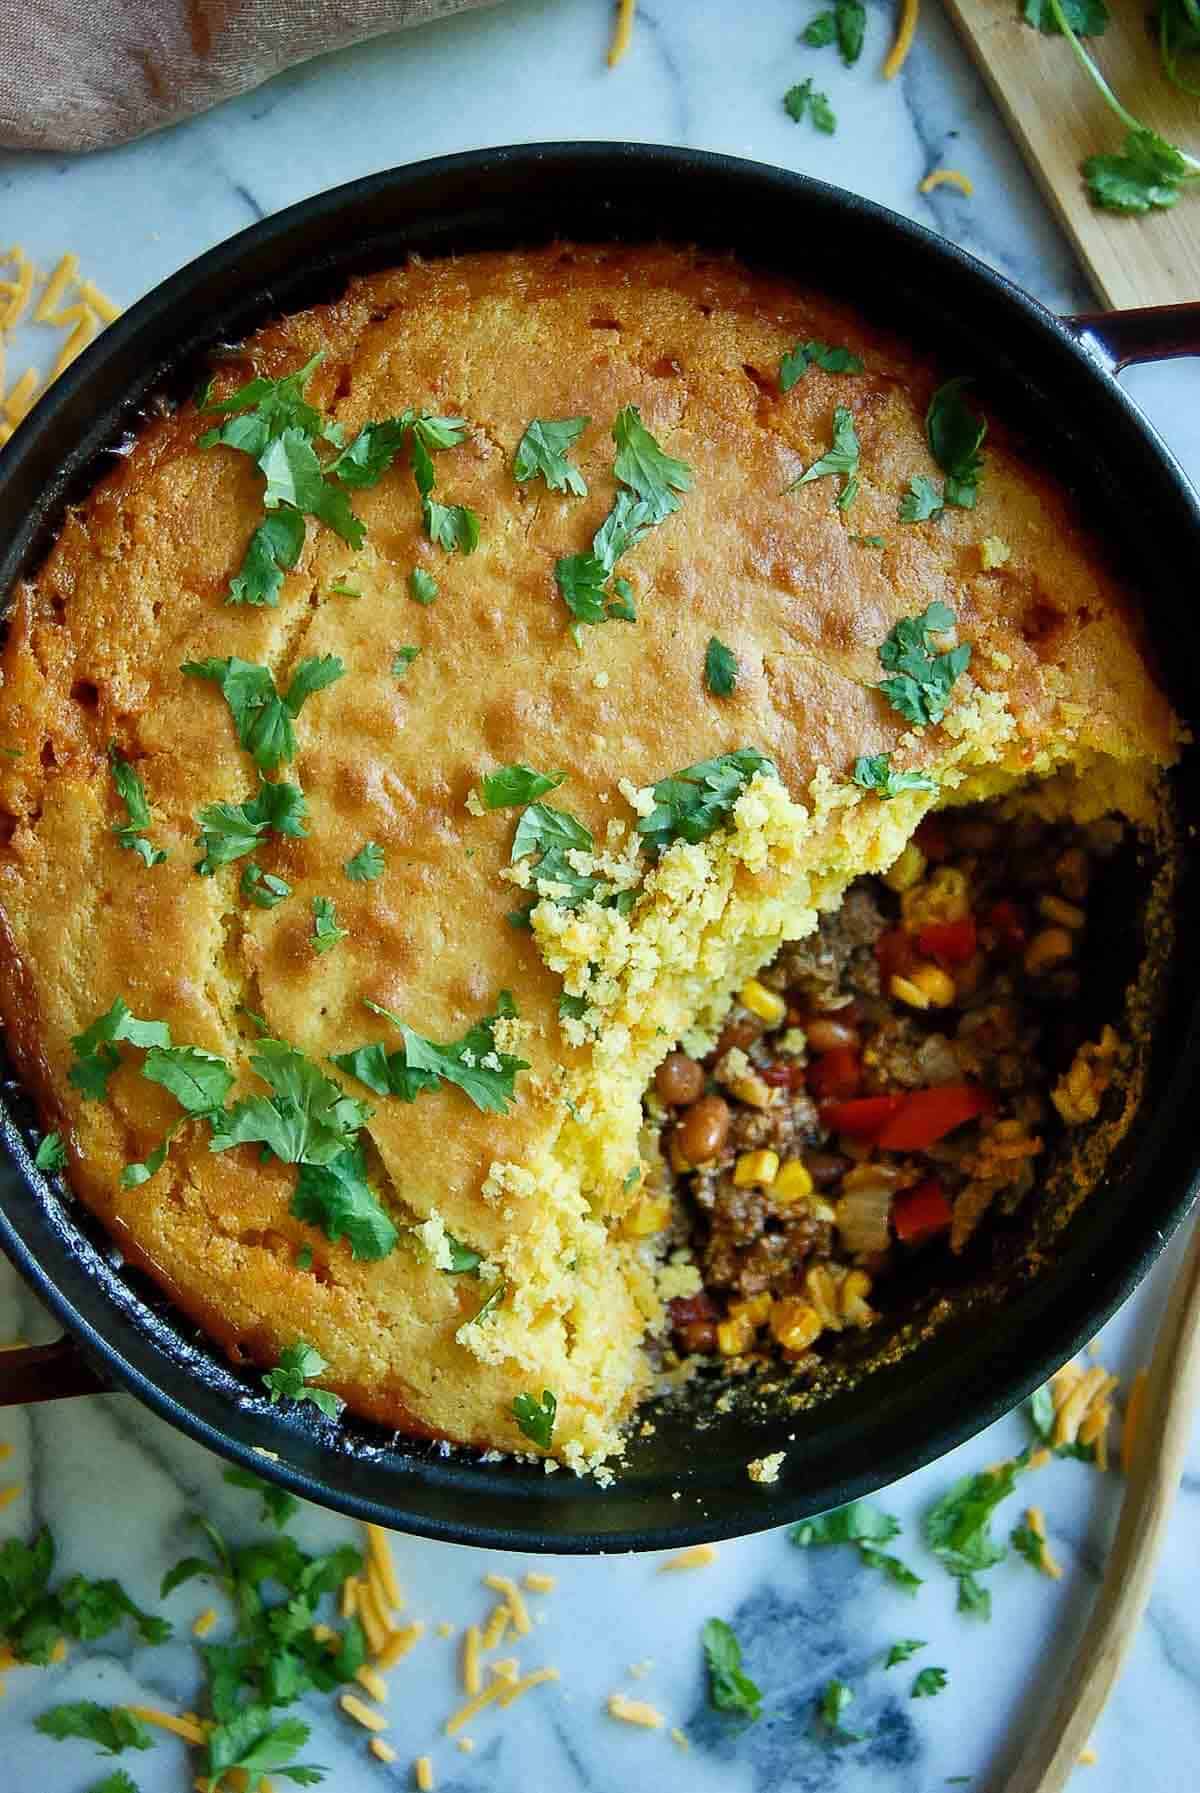 cornbread cowboy casserole in dutch oven on countertop with section of casserole spooned out.